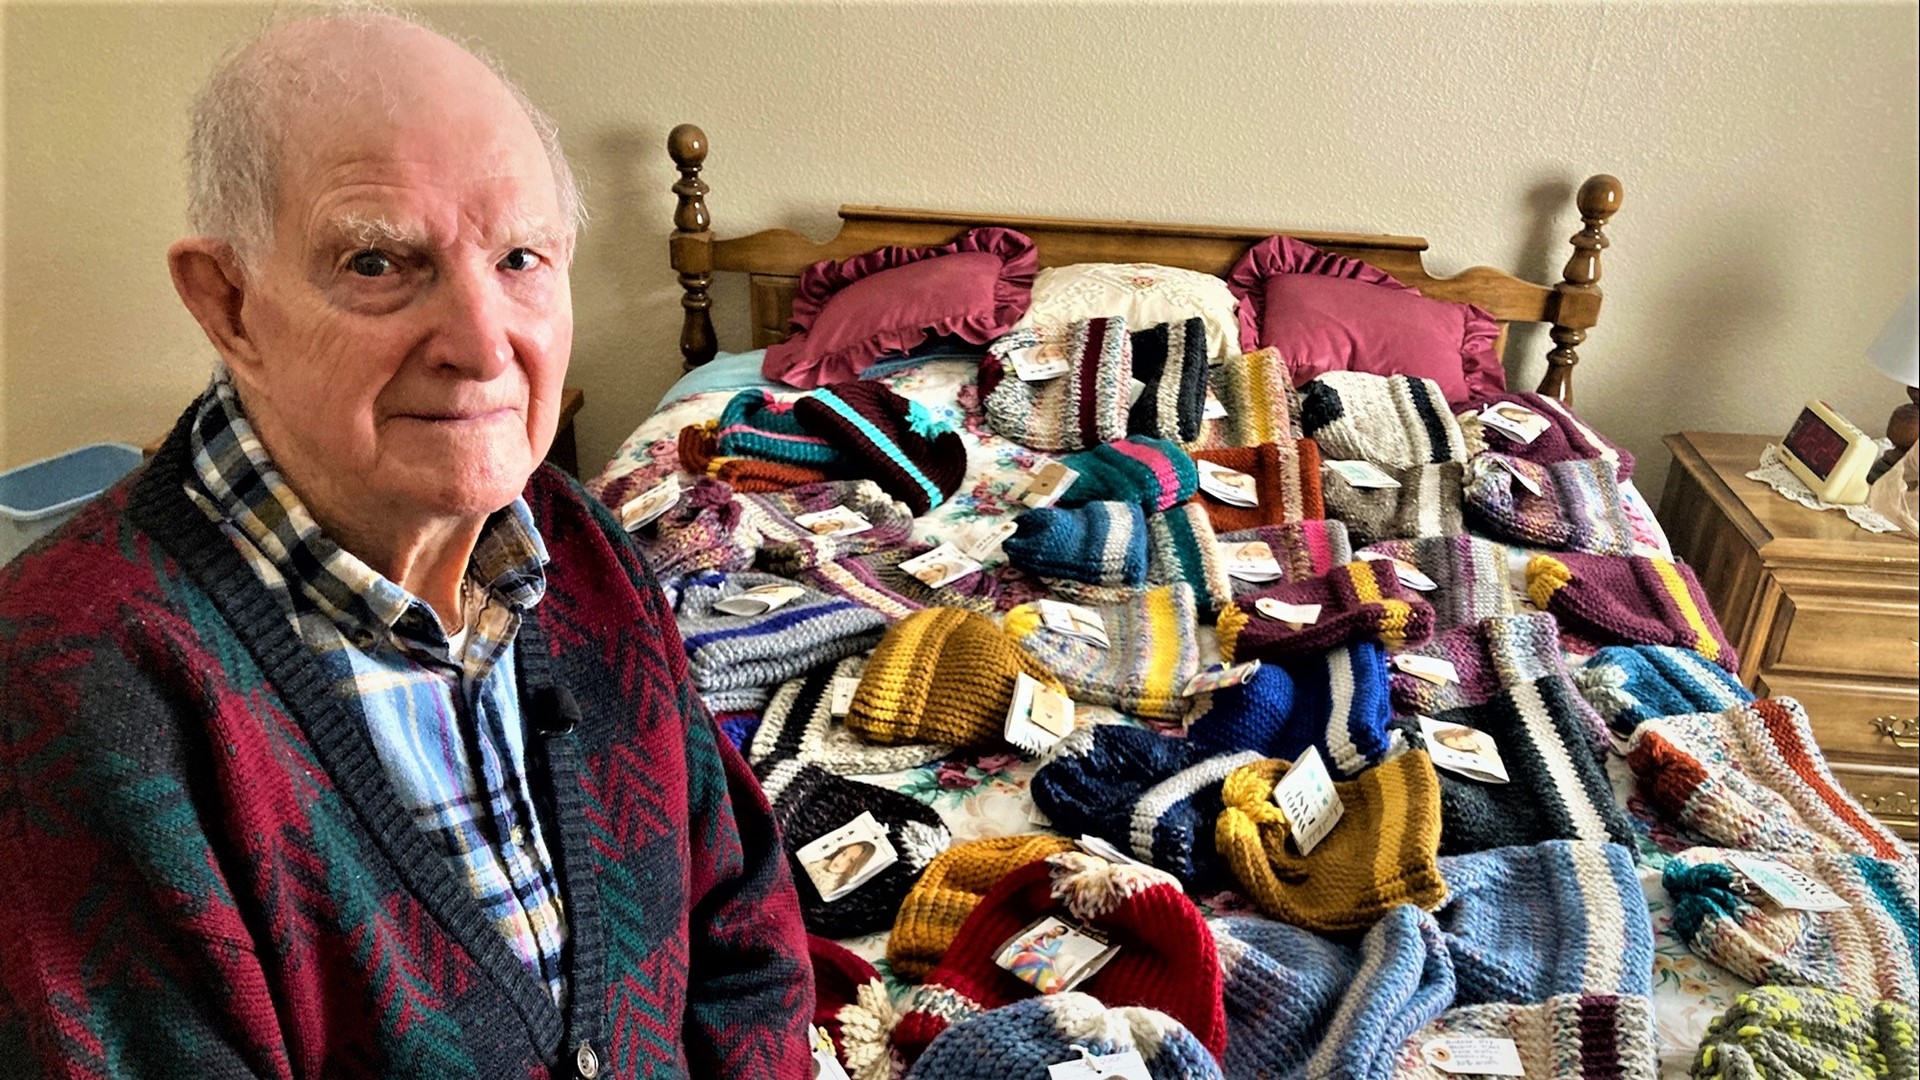 Tom Cornish set a goal of weaving one hat a day, but often exceeded that.